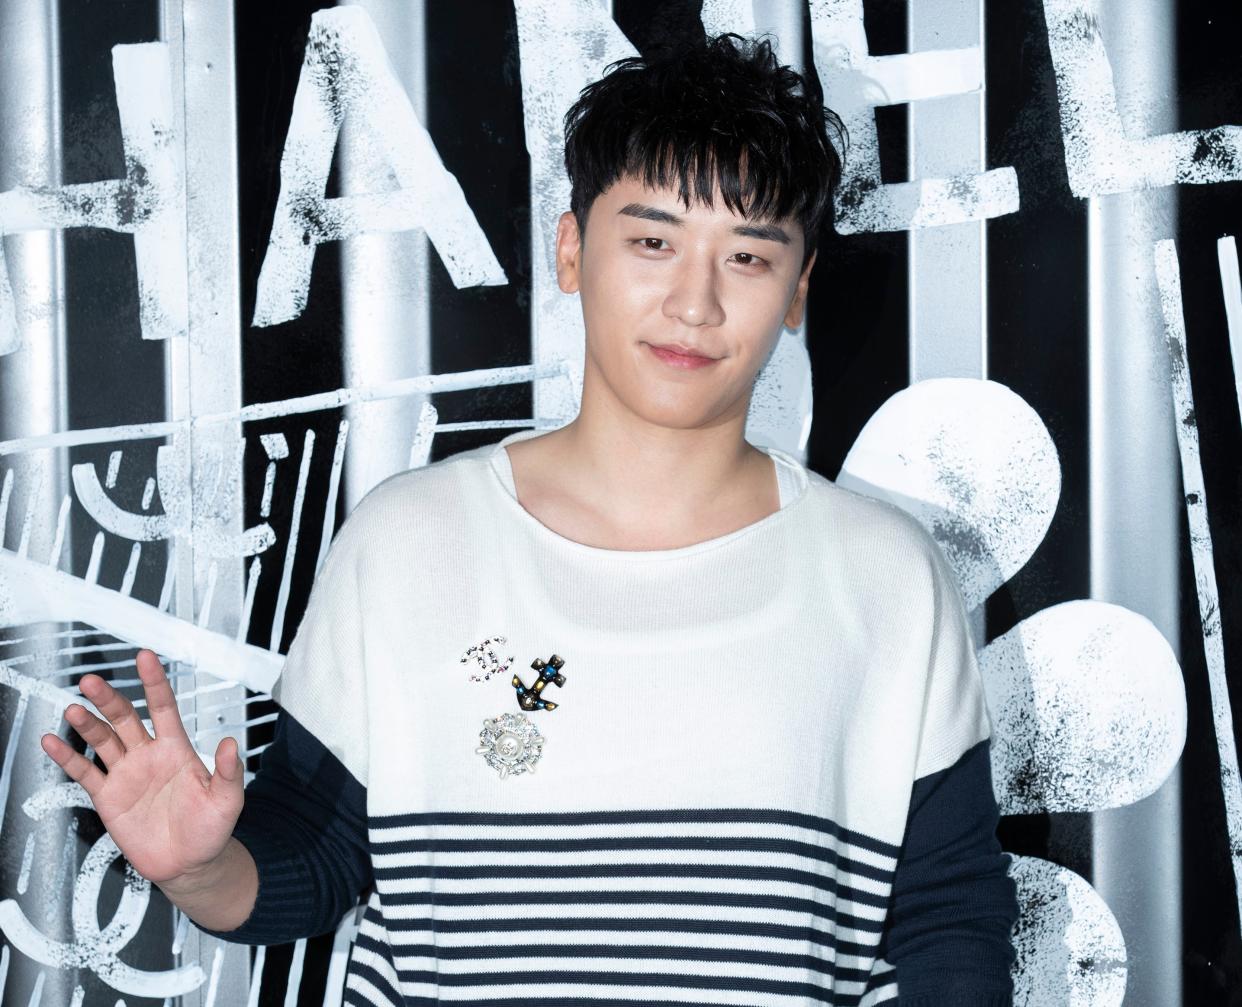 K-pop star Seungri at a Chanel event in June 2018. (Photo: Press Association)